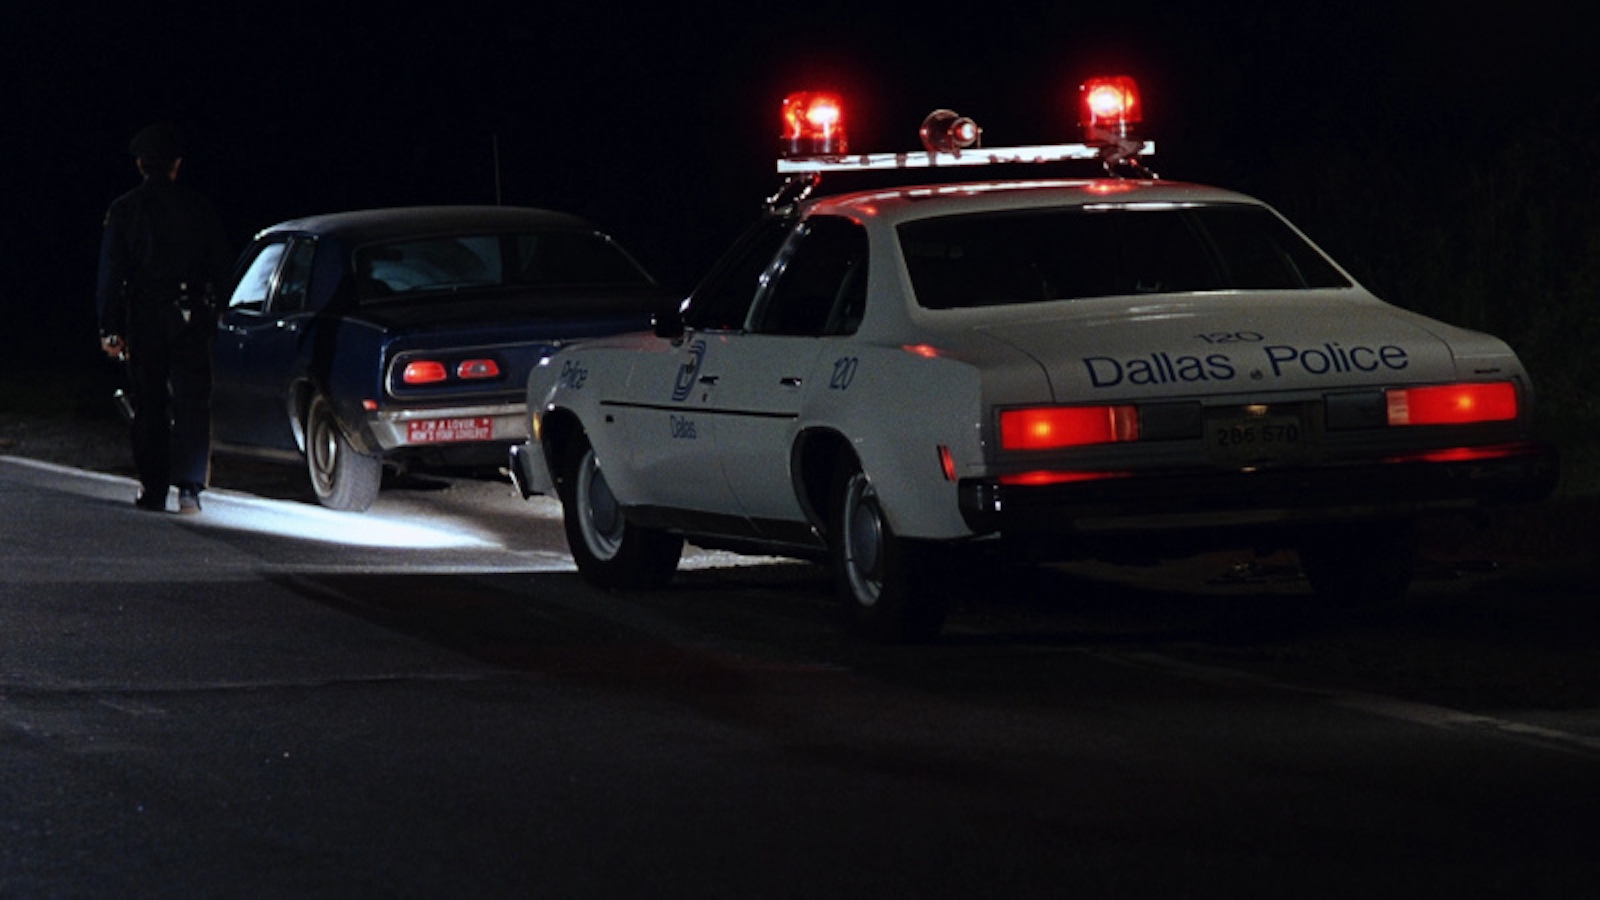 A police car with siren lights on pulls over a car at night